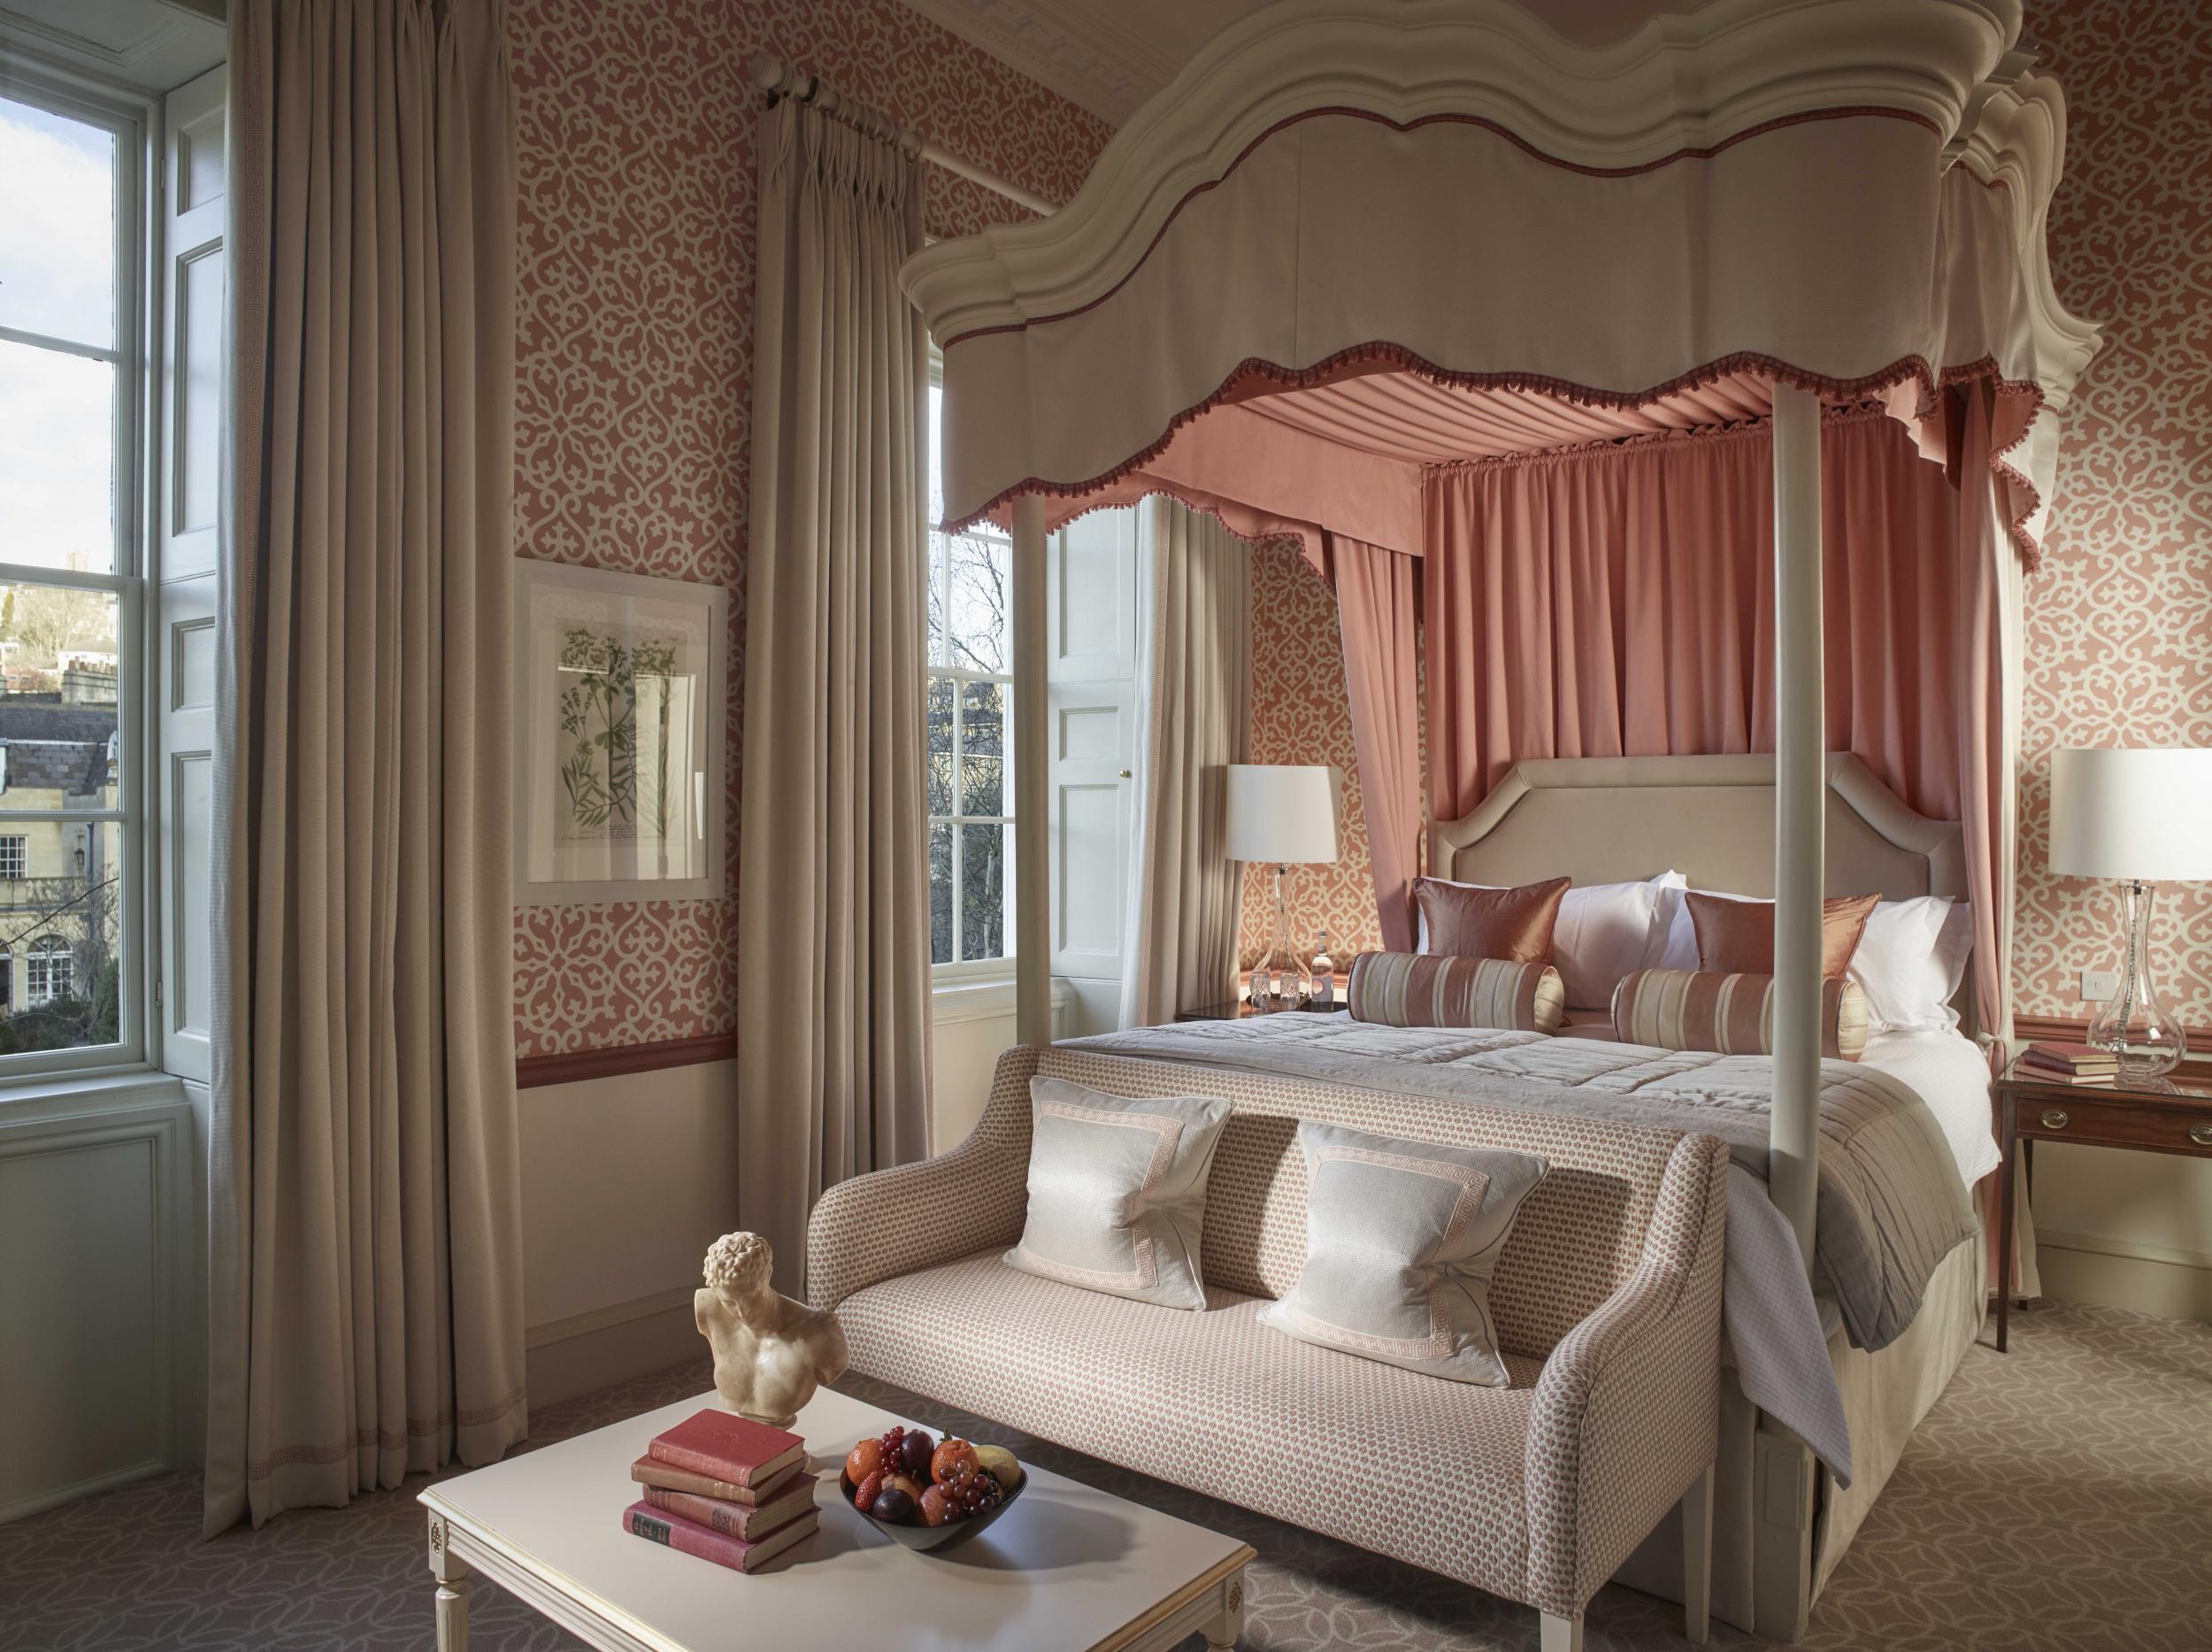 The Sir Percy Blakeney suite at the The Royal Crescent Hotel and Spa